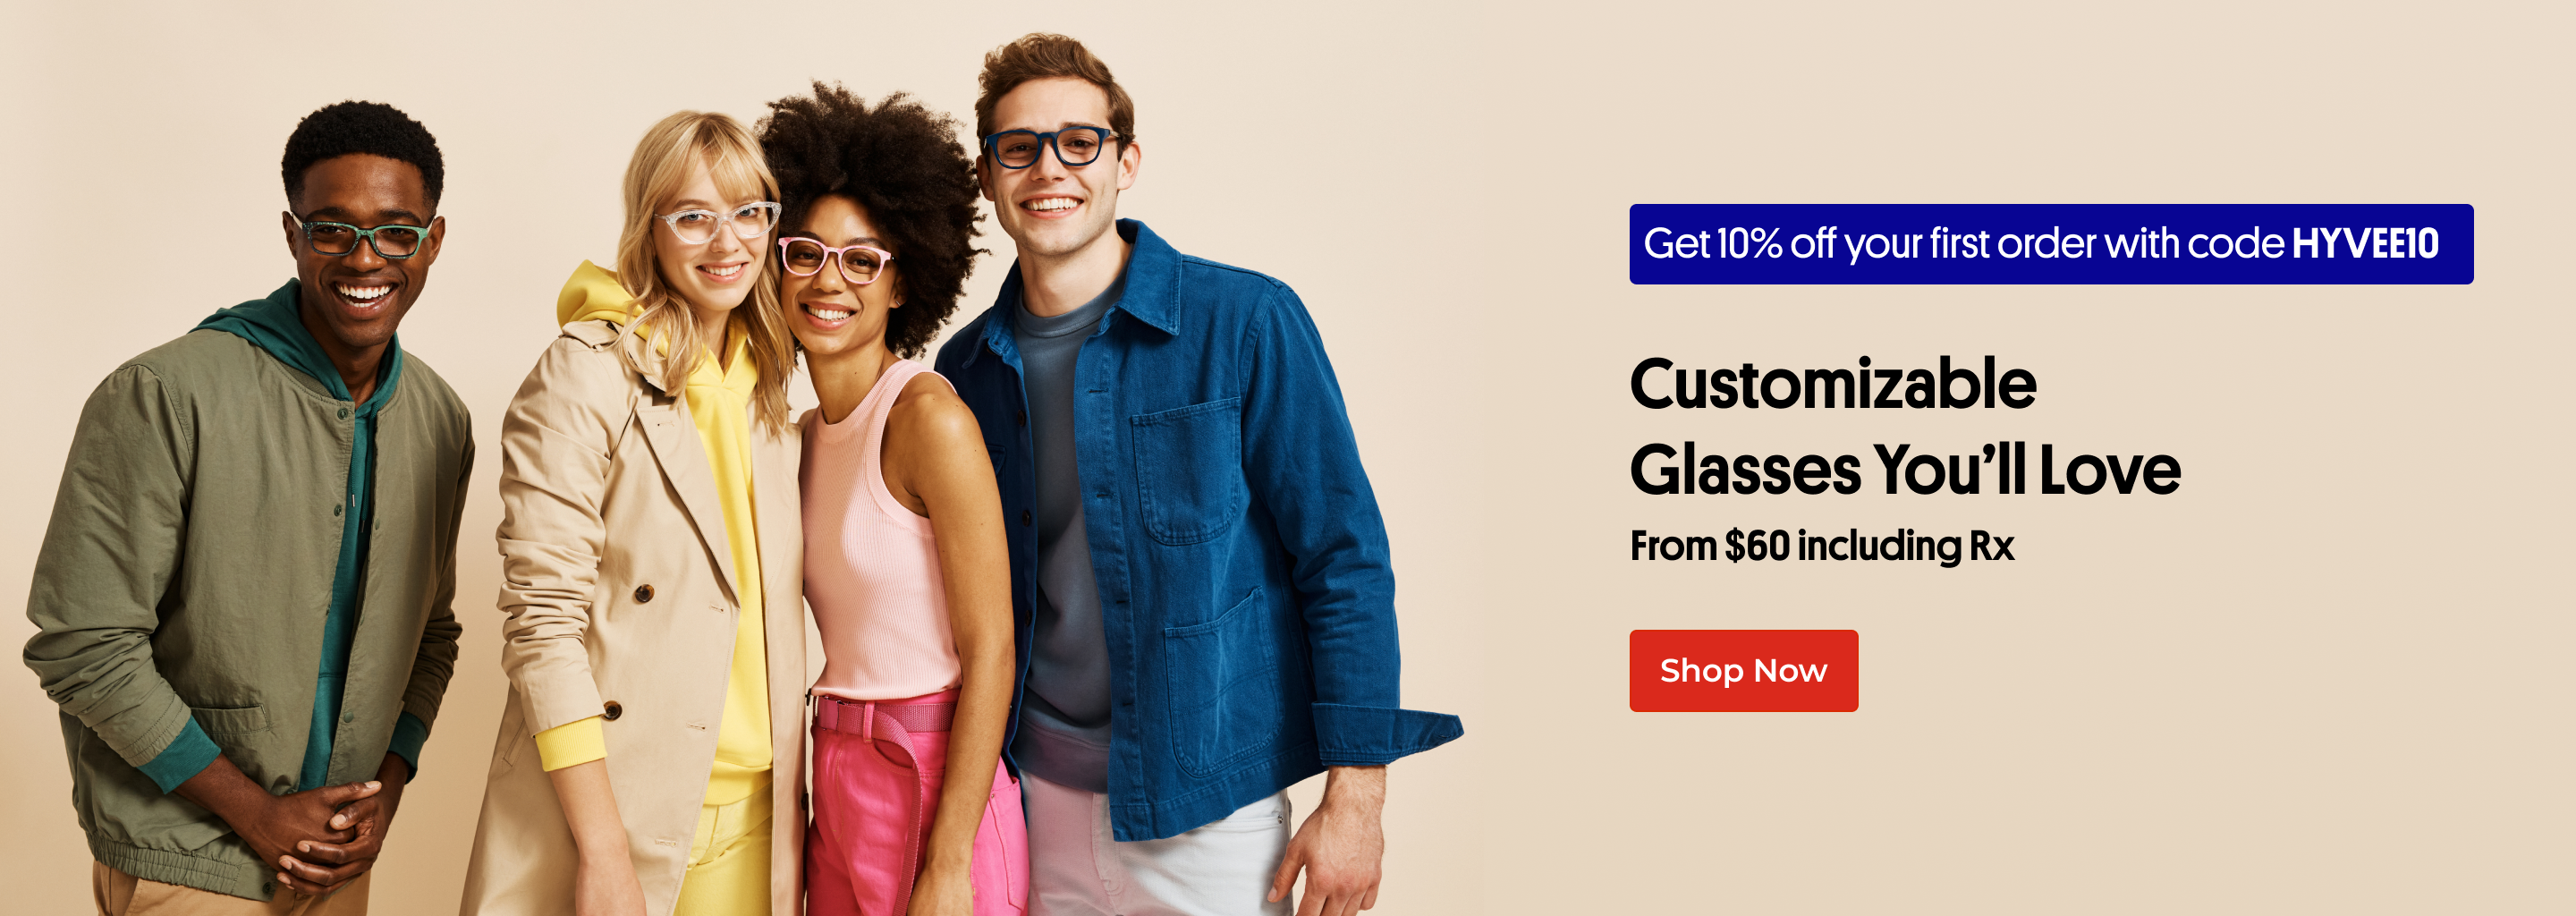 Save 10% on your first order with Pair Eyewear 